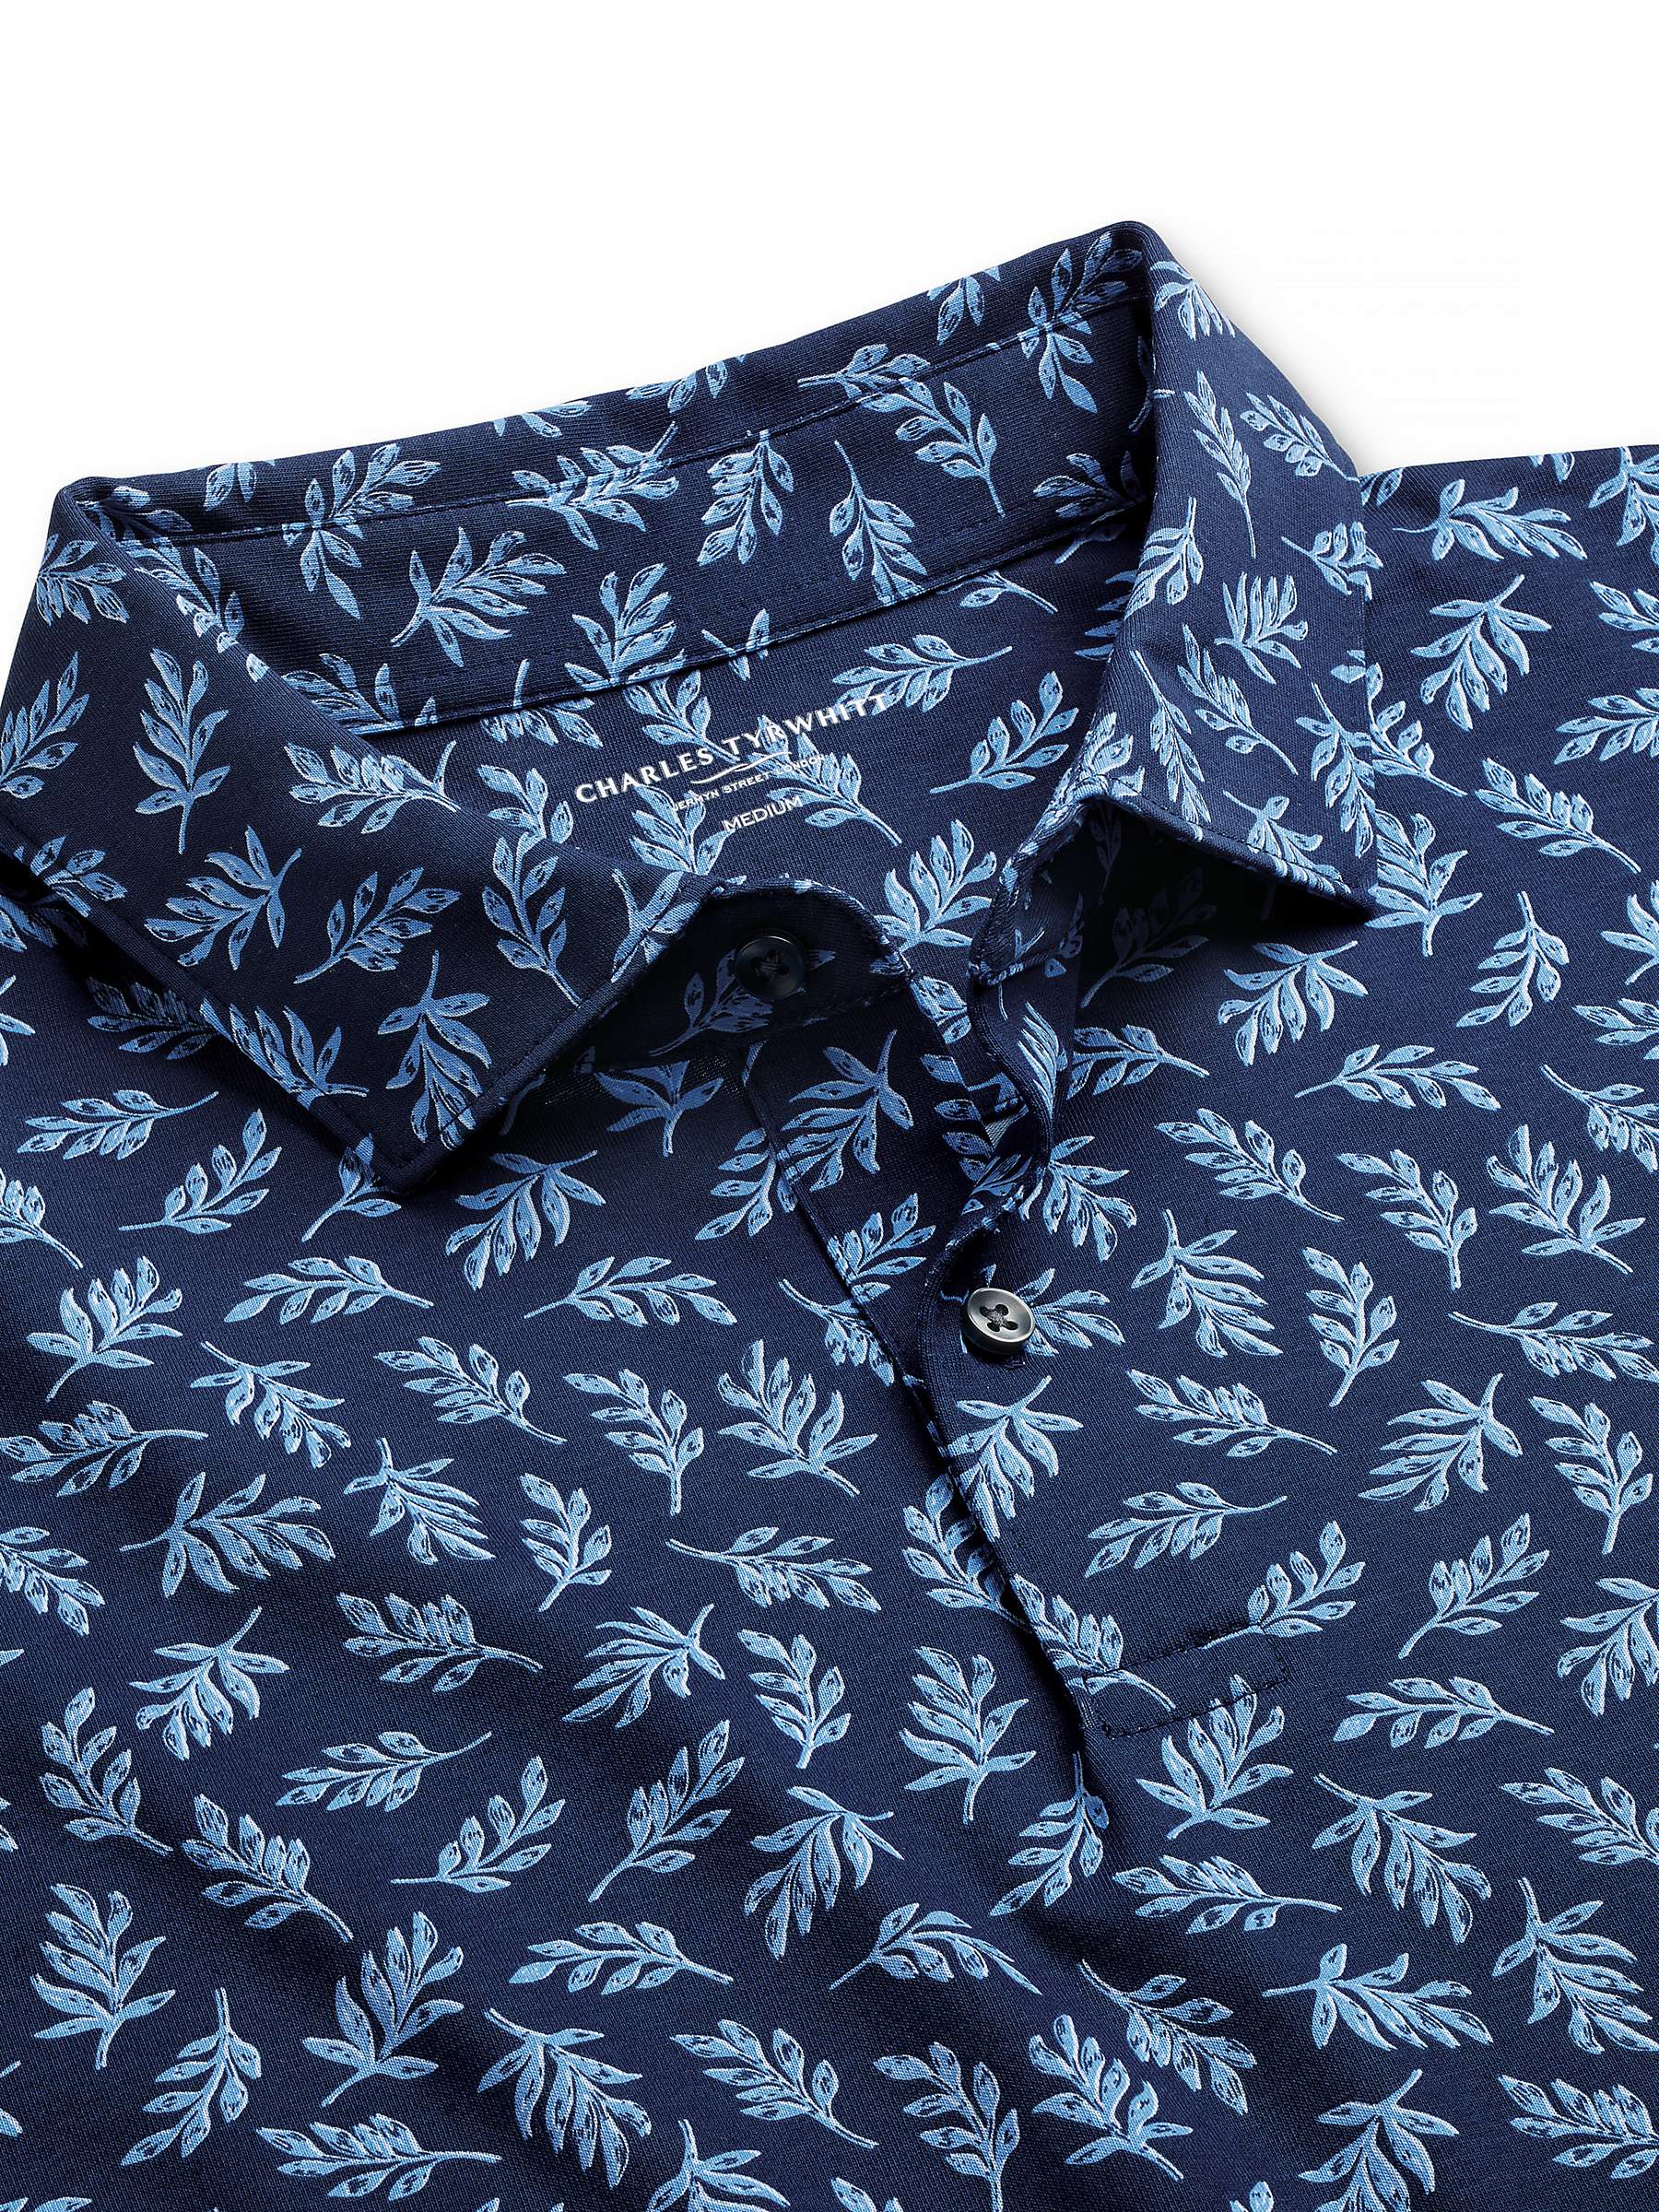 Buy Charles Tyrwhitt Floral Printed Short Sleeve Polo Shirt, French Blue Online at johnlewis.com